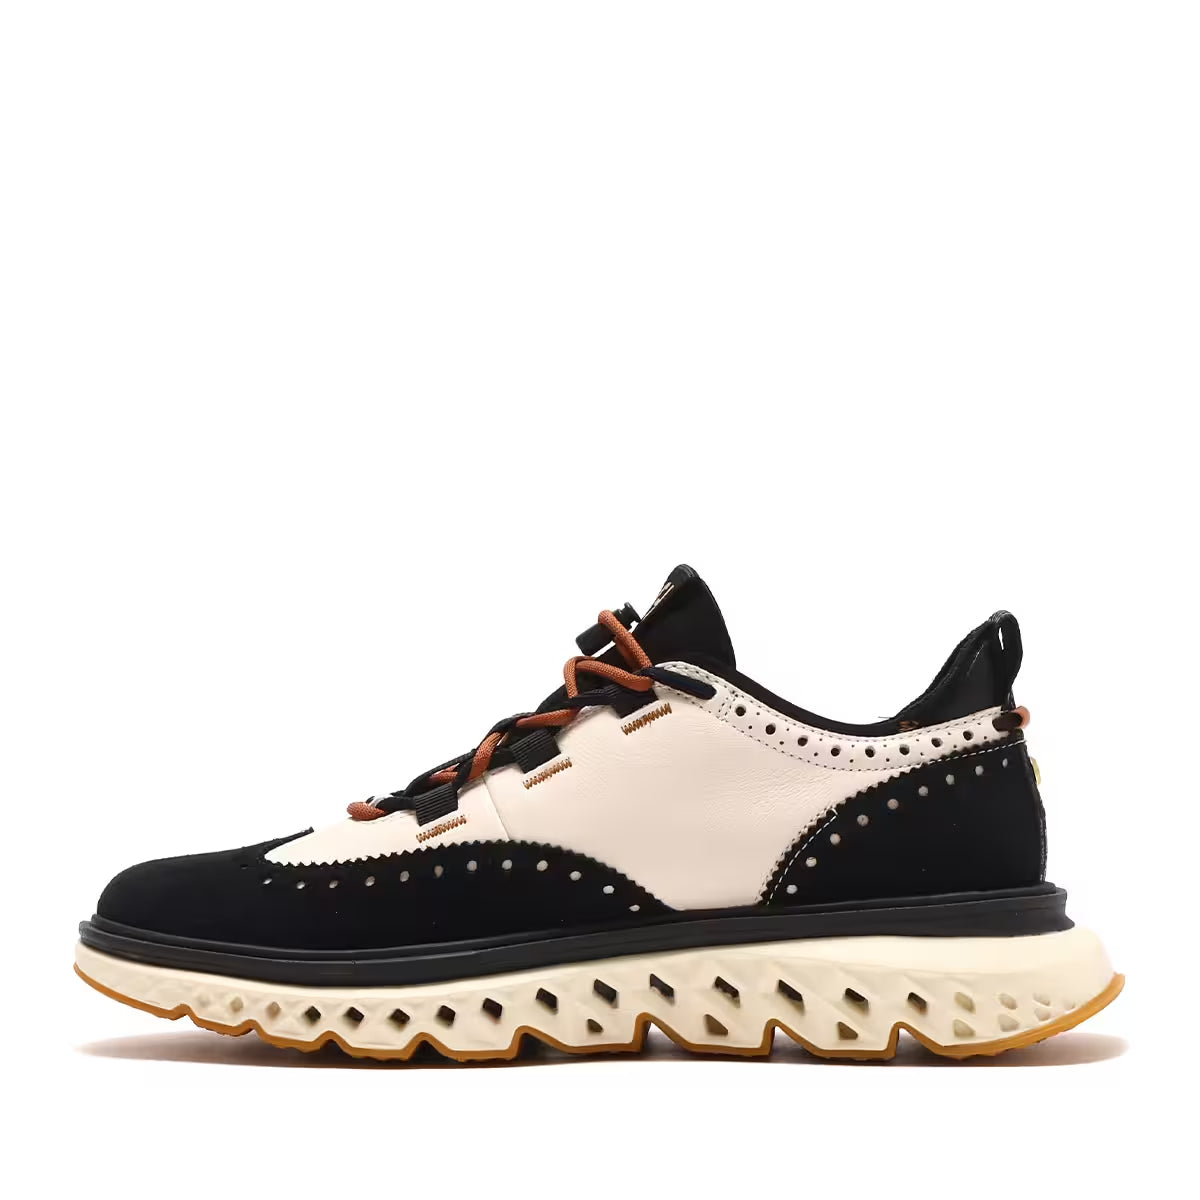 COLE HAAN CH X ATMOS 5 ZEROGRAND WING OX